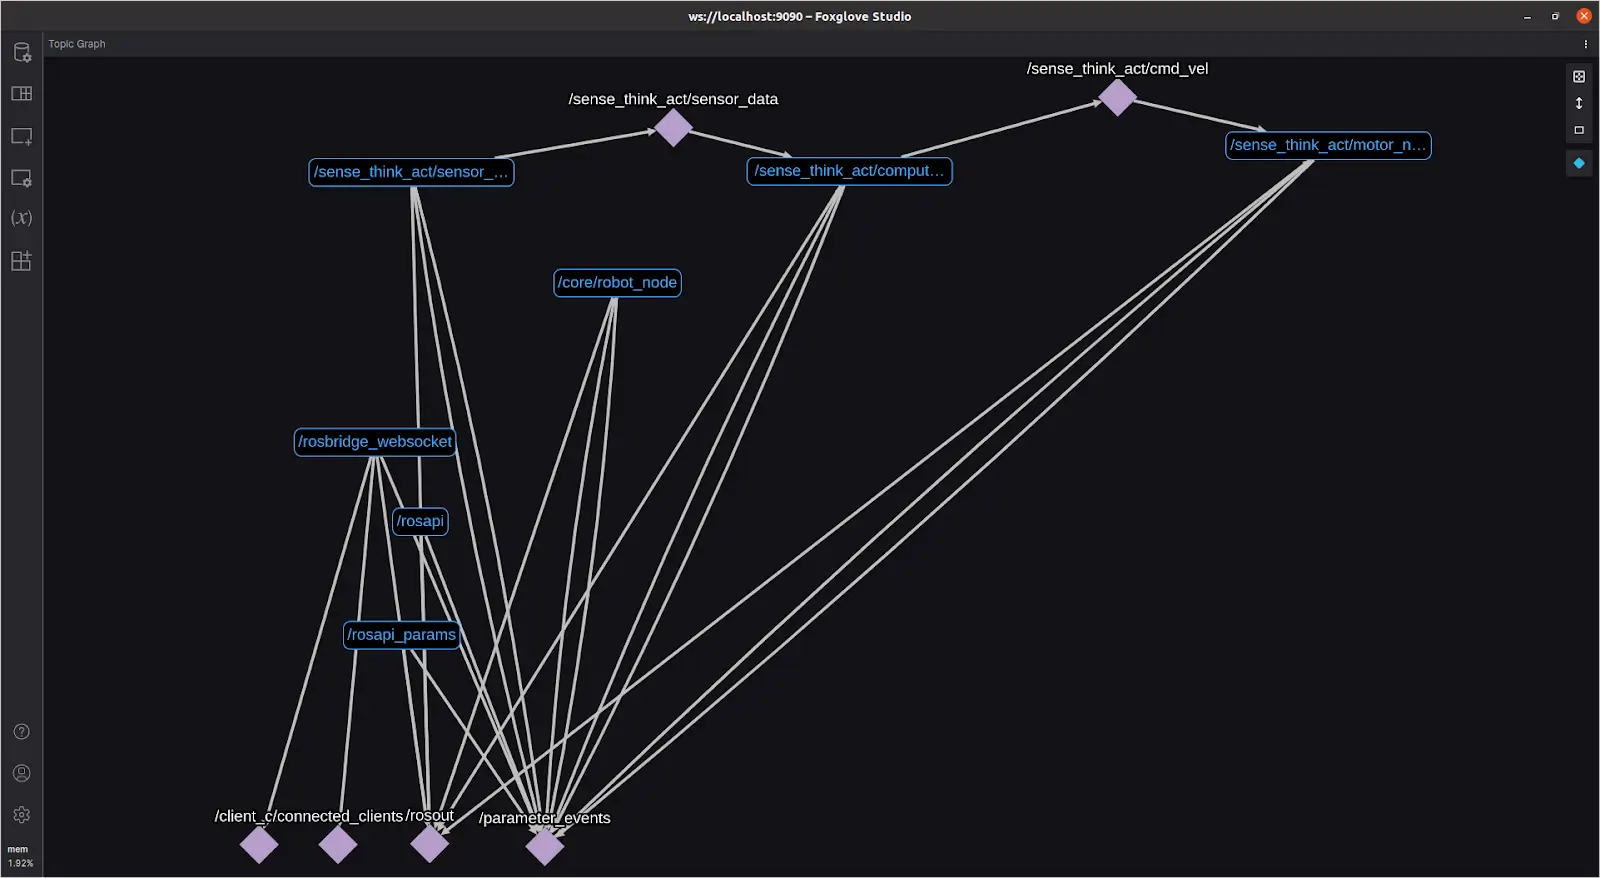 All nodes in the Topic Graph panel